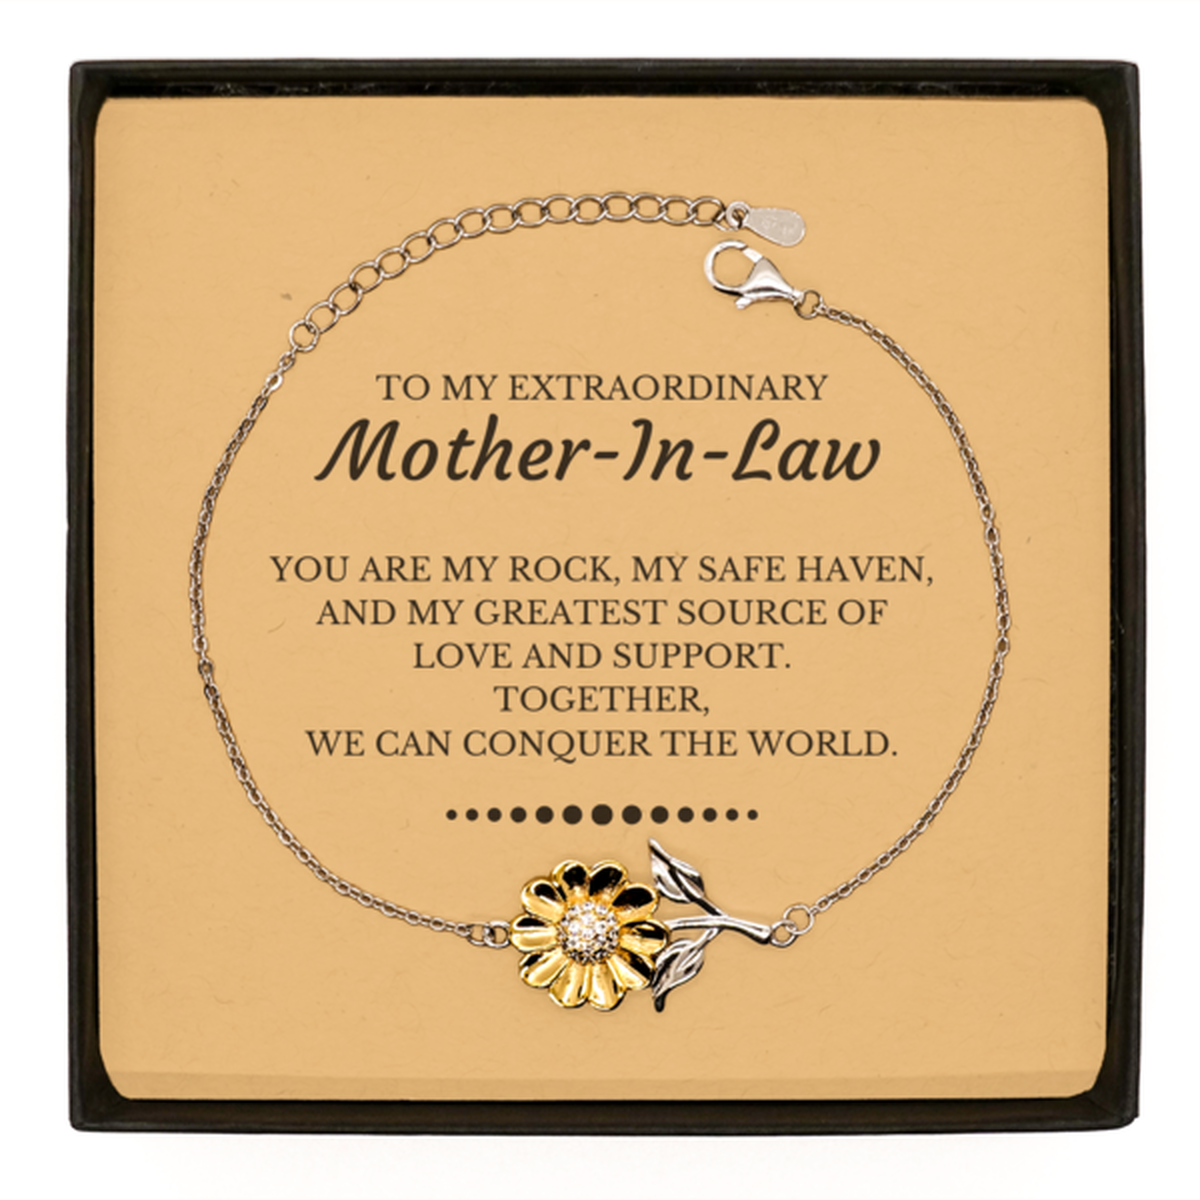 To My Extraordinary Mother-In-Law Gifts, Together, we can conquer the world, Birthday Sunflower Bracelet For Mother-In-Law, Christmas Gifts For Mother-In-Law